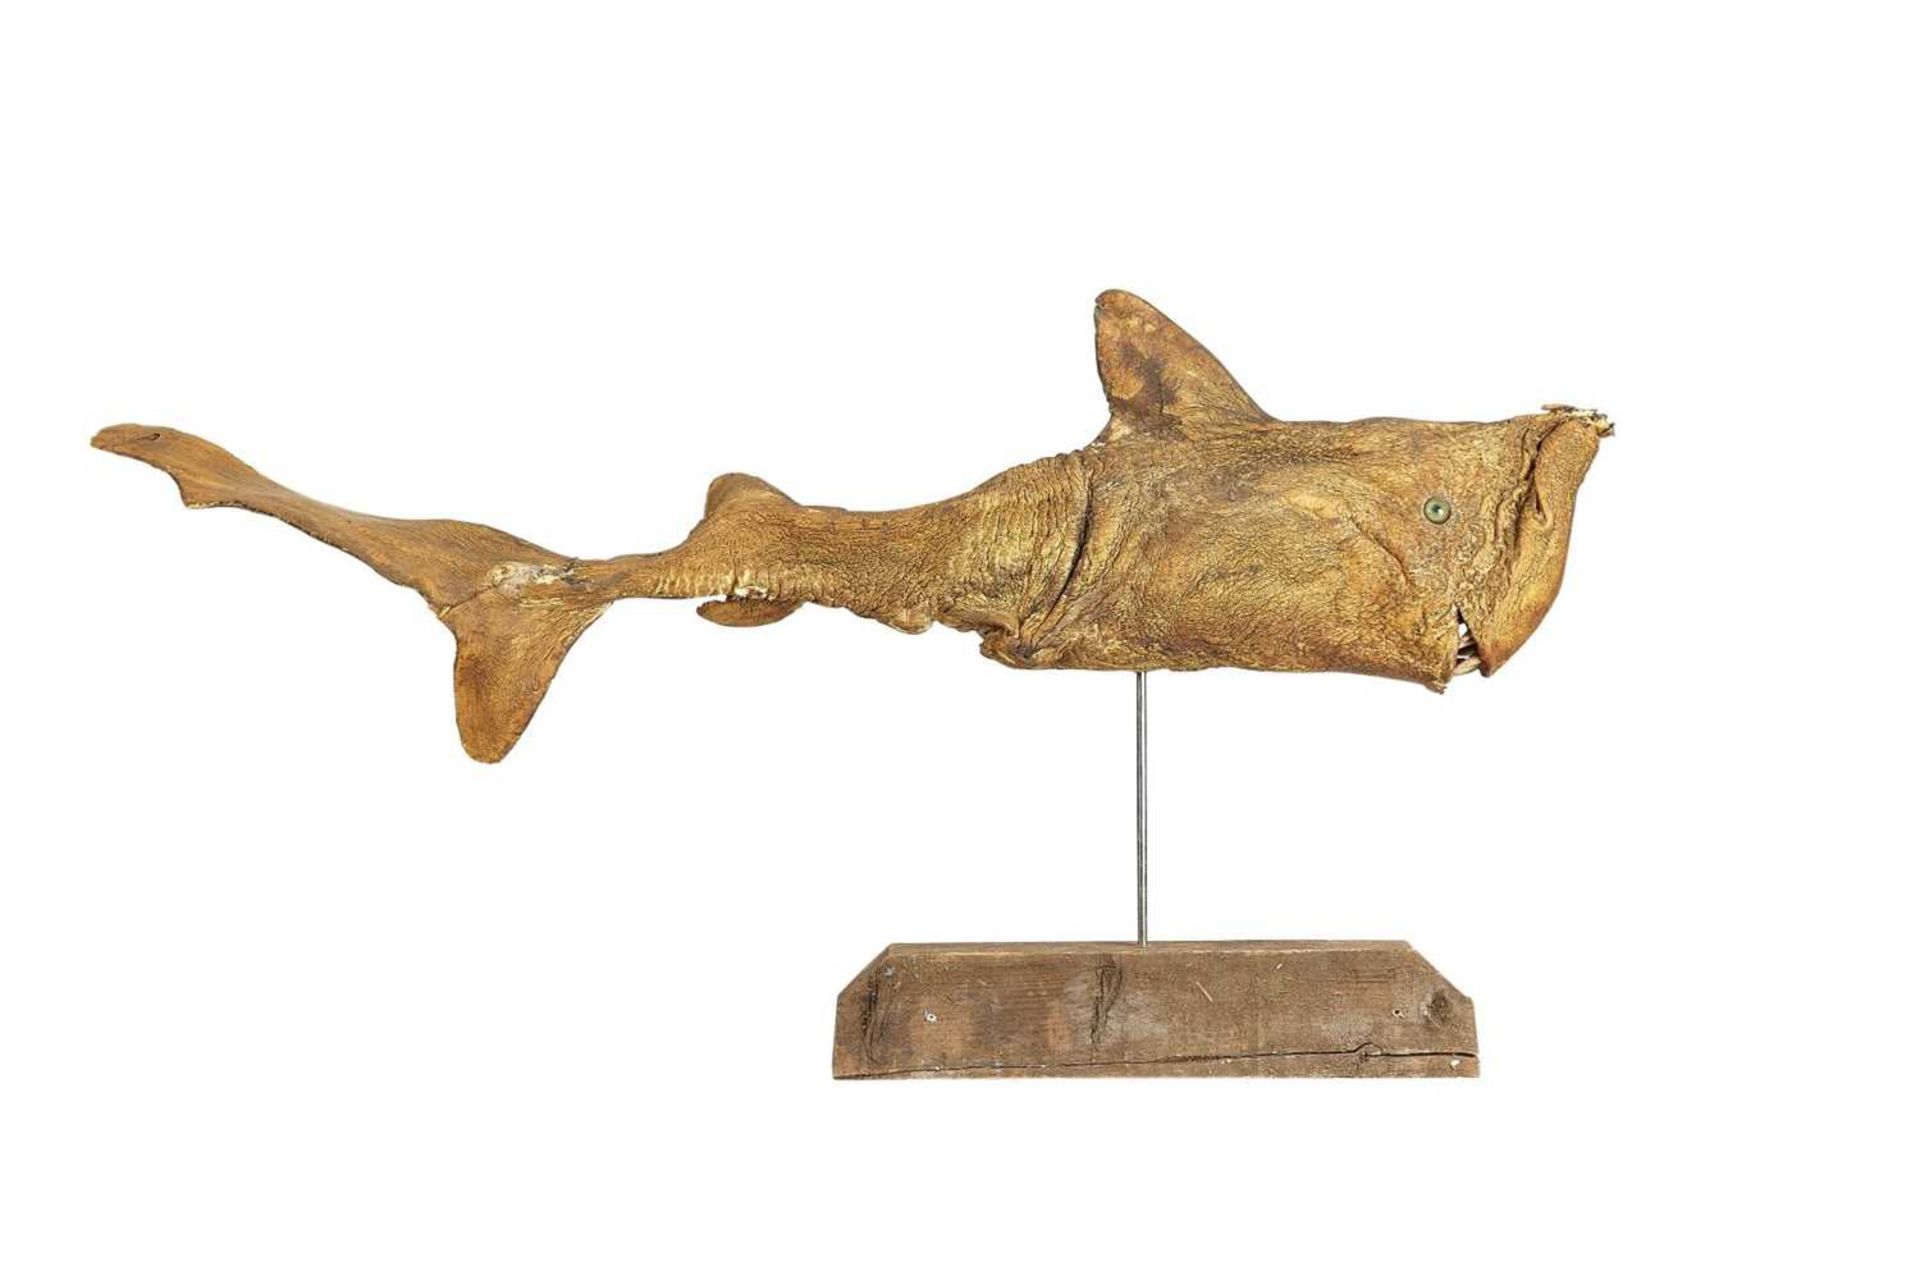 A LIFE-SIZE PAINTED MODEL OF A DEFORMED SHARK